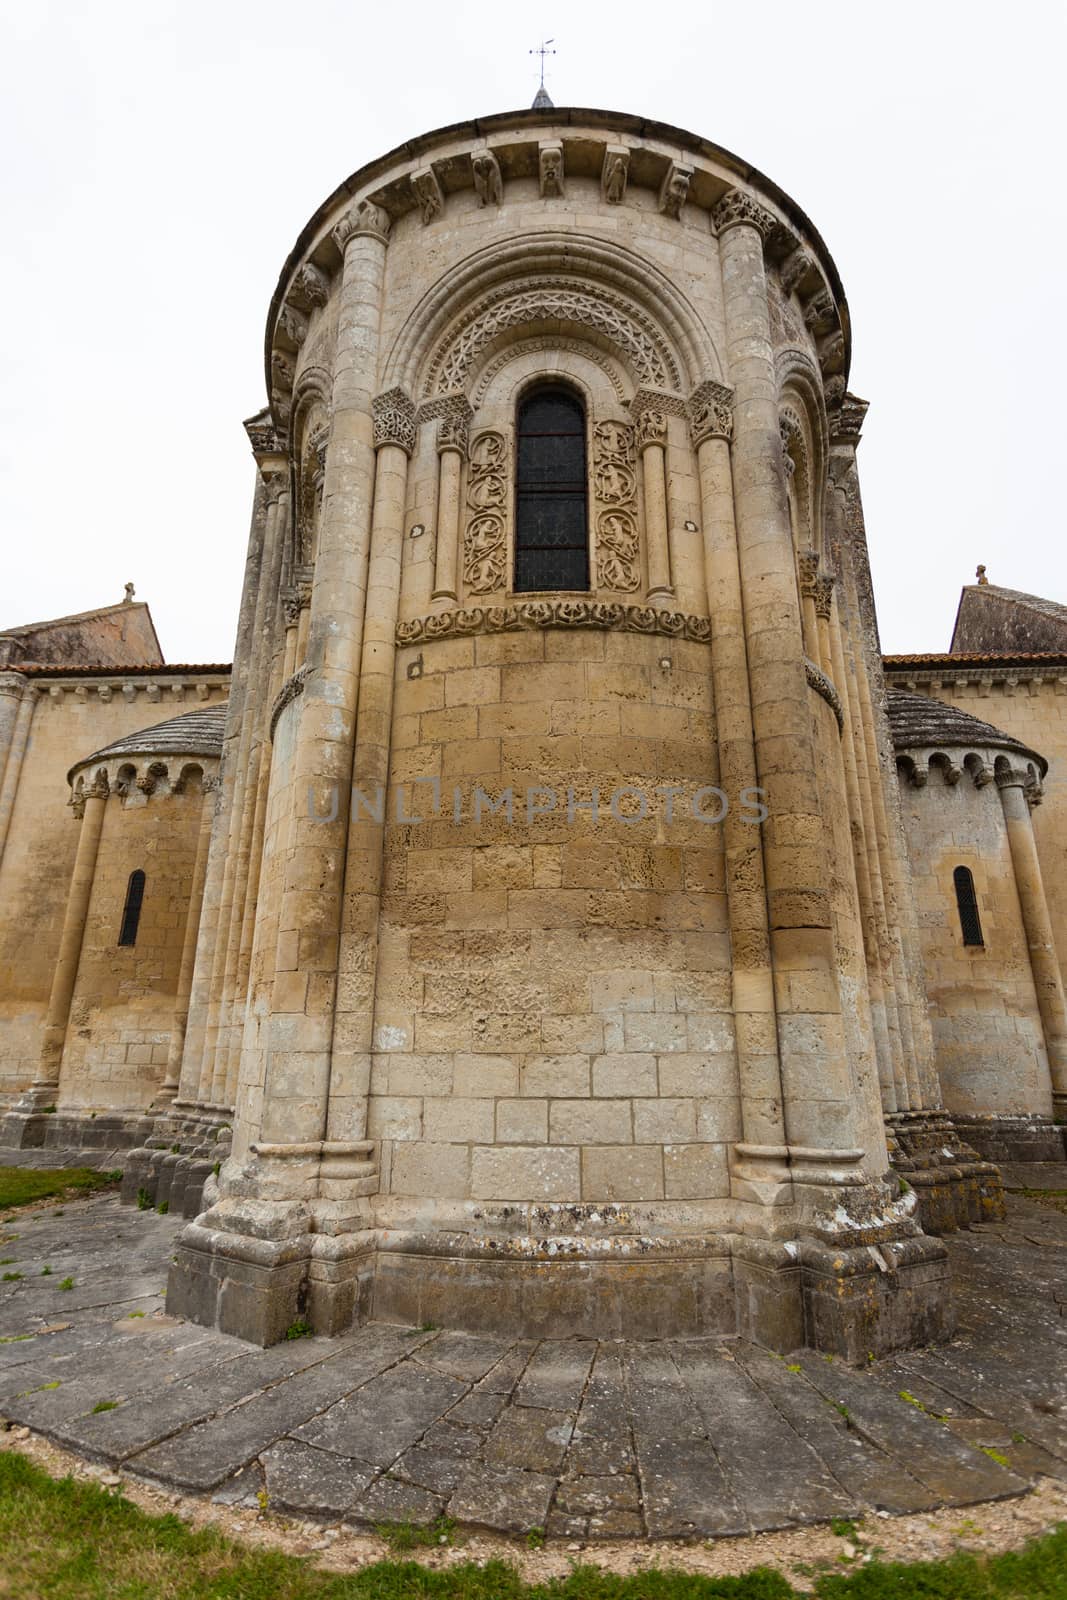 Abse of Aulnay de Saintonge church in Charente Maritime region of France